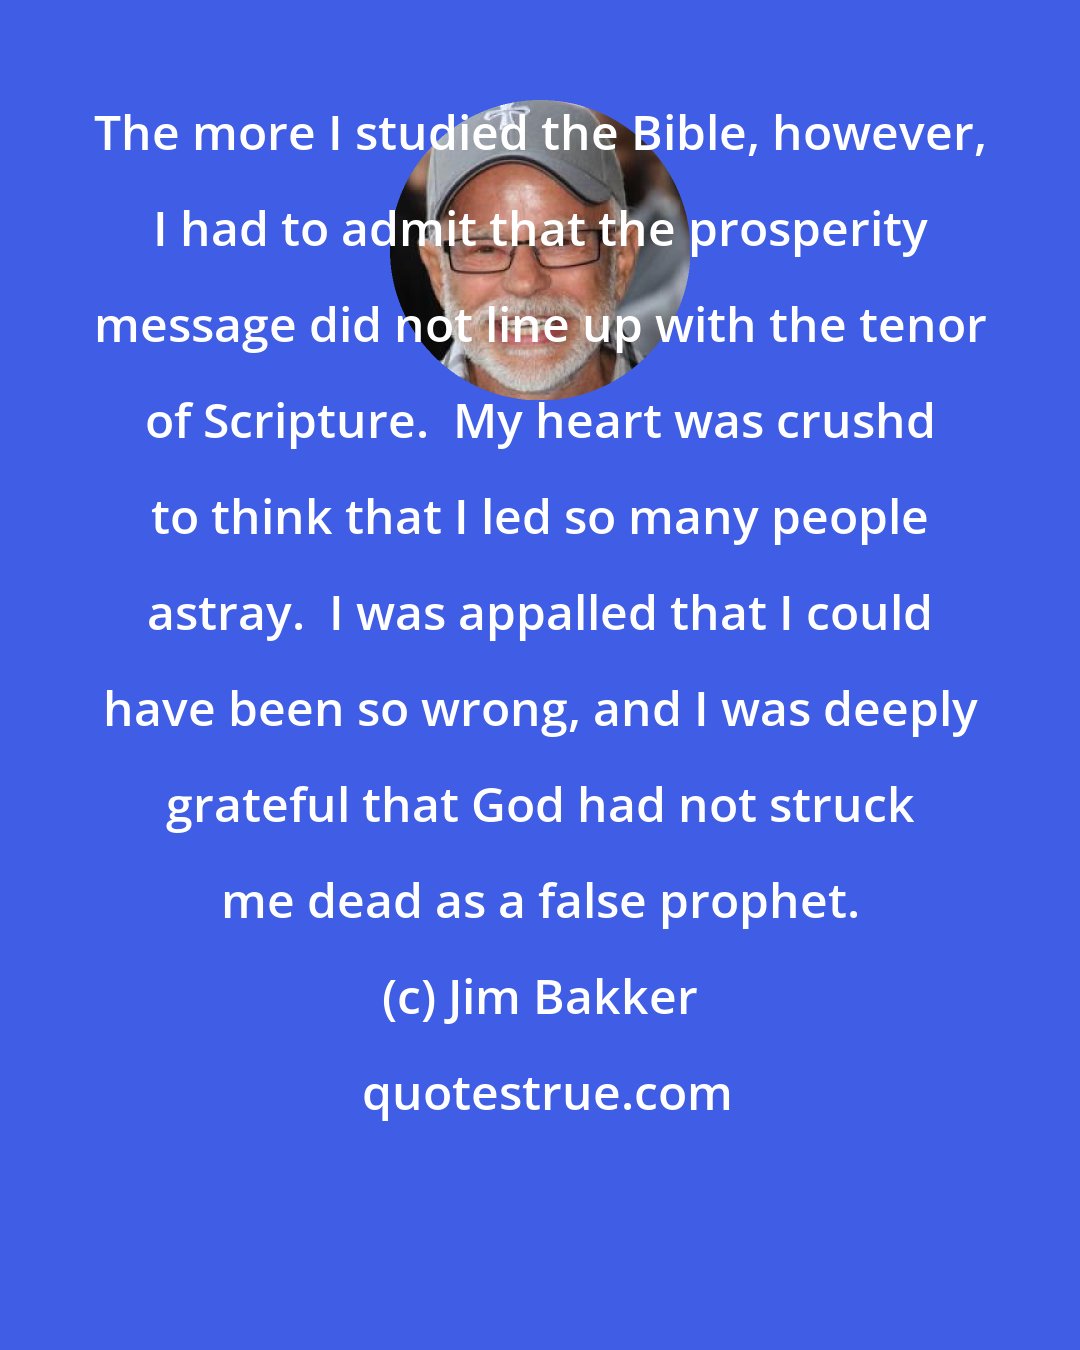 Jim Bakker: The more I studied the Bible, however, I had to admit that the prosperity message did not line up with the tenor of Scripture.  My heart was crushd to think that I led so many people astray.  I was appalled that I could have been so wrong, and I was deeply grateful that God had not struck me dead as a false prophet.